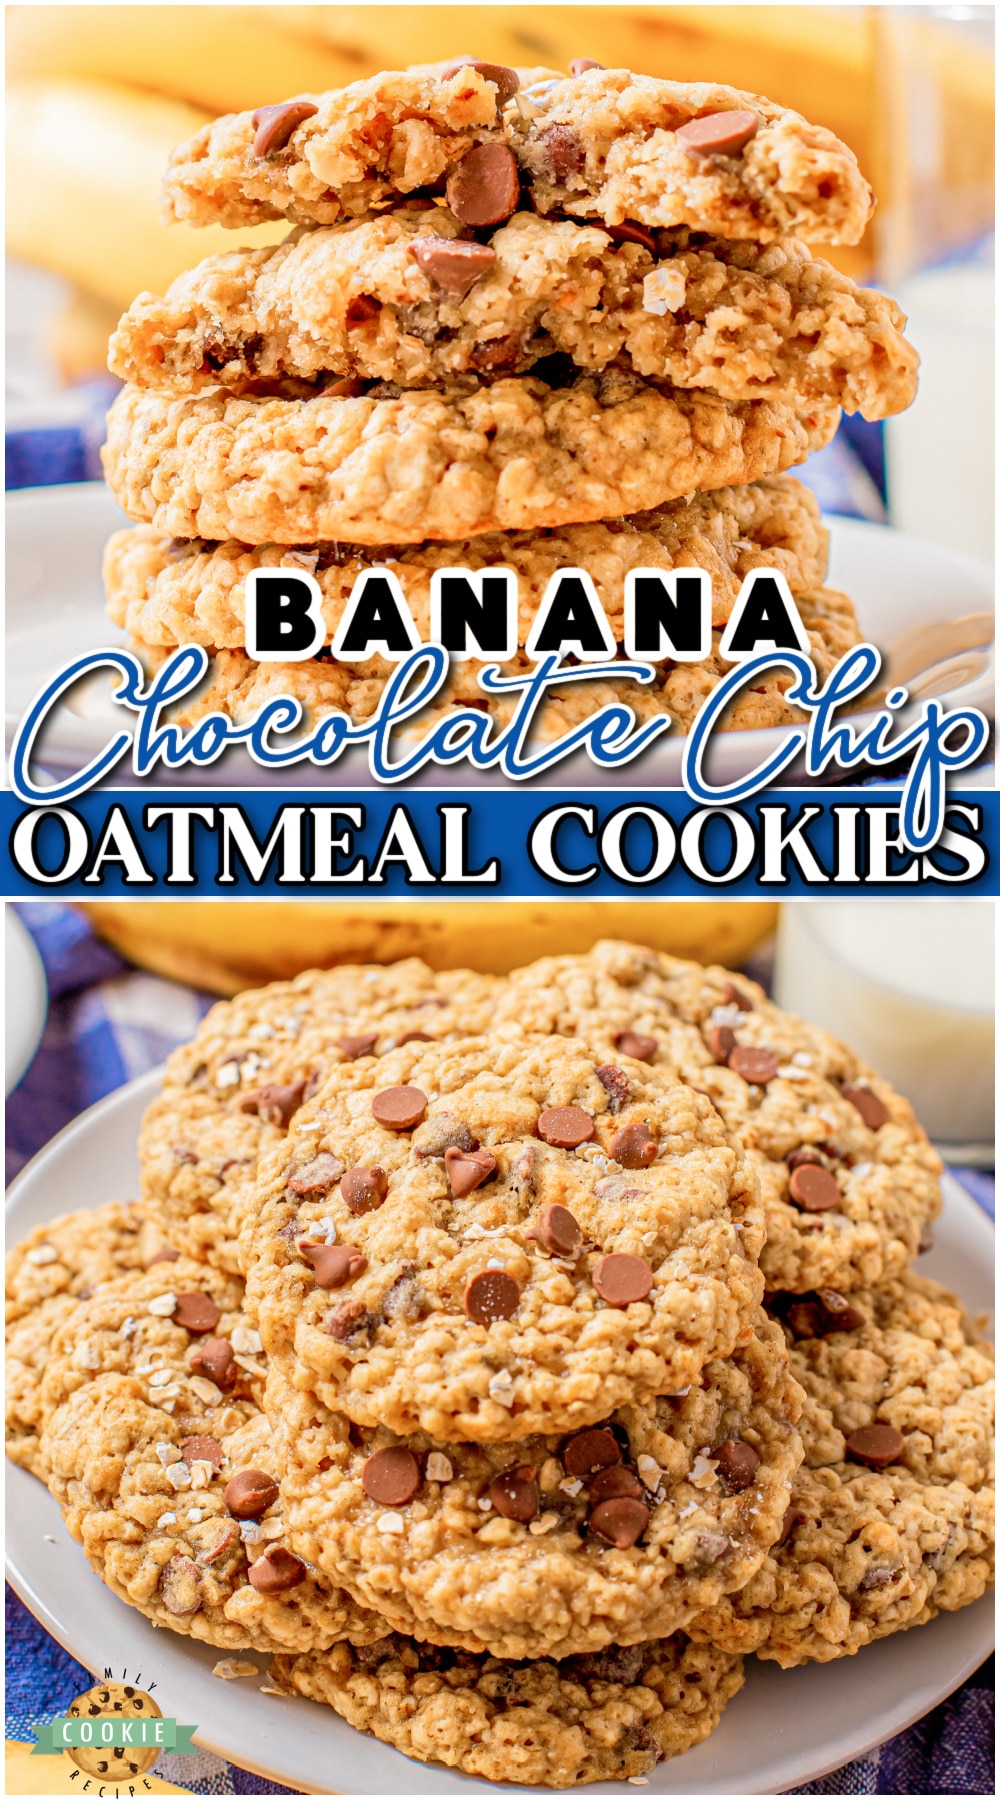 Banana Chocolate Chip Oatmeal Cookies are chewy, sweet oatmeal cookies packed with chocolate chips and banana! Fantastic buttery banana oatmeal cookies that everyone loves!  via @buttergirls